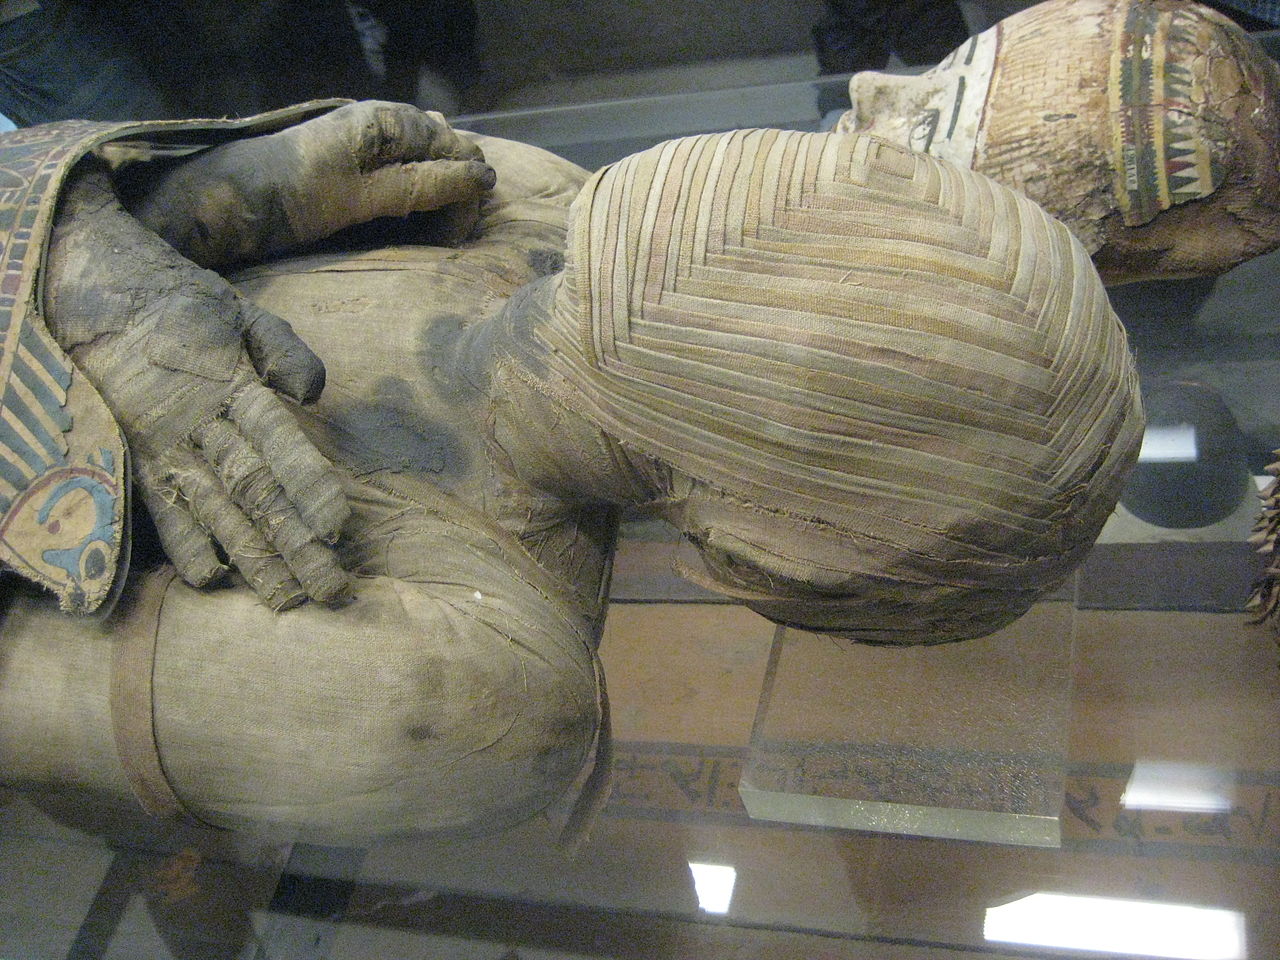 Mummification In Ancient Egypt Started 1 500 Years Earlier